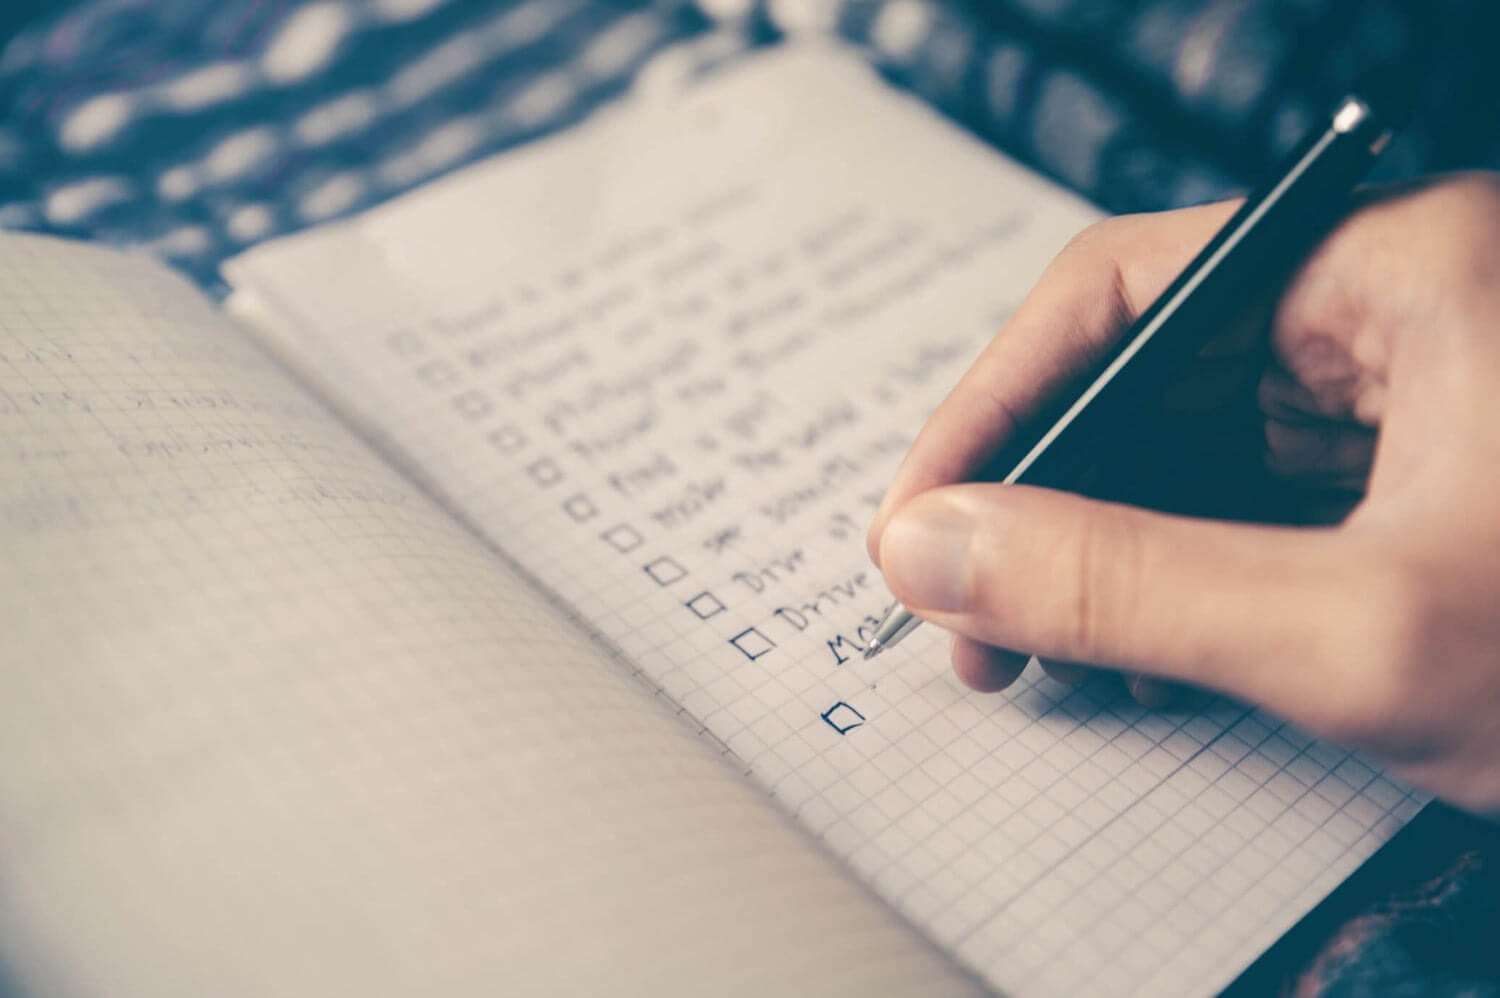 Creating an end-of-life checklist ensures that your wishes are honored and helps your loved ones during a time of grief